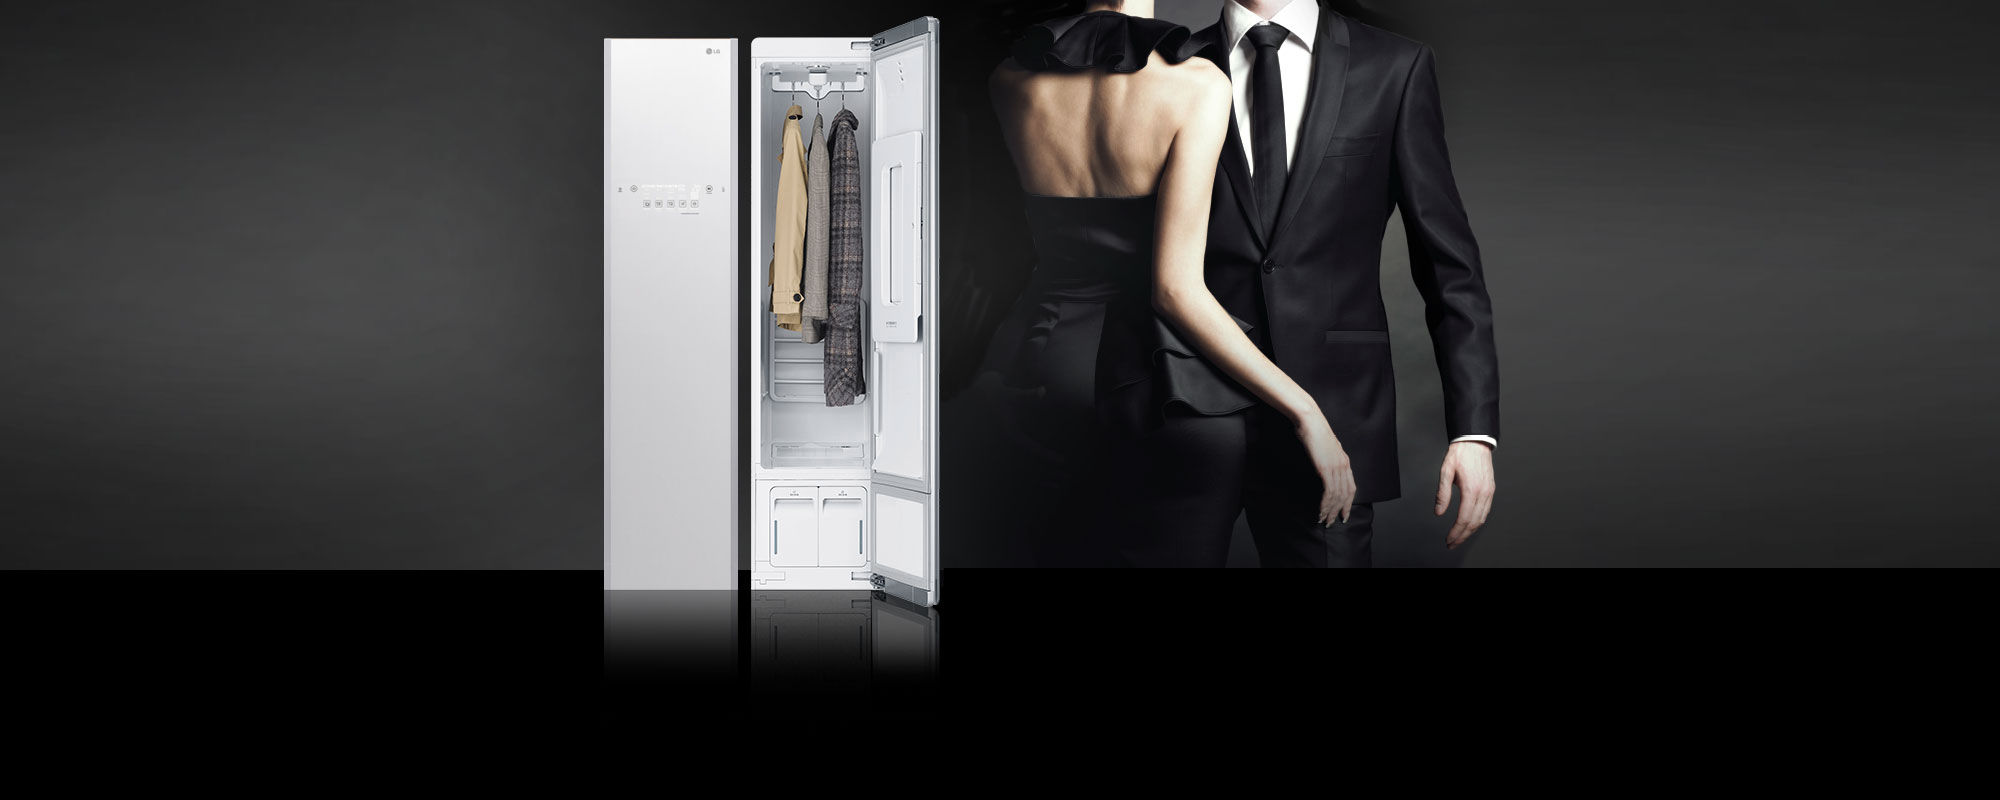 LG Styler: A smart wardrobe that sanitises your clothes